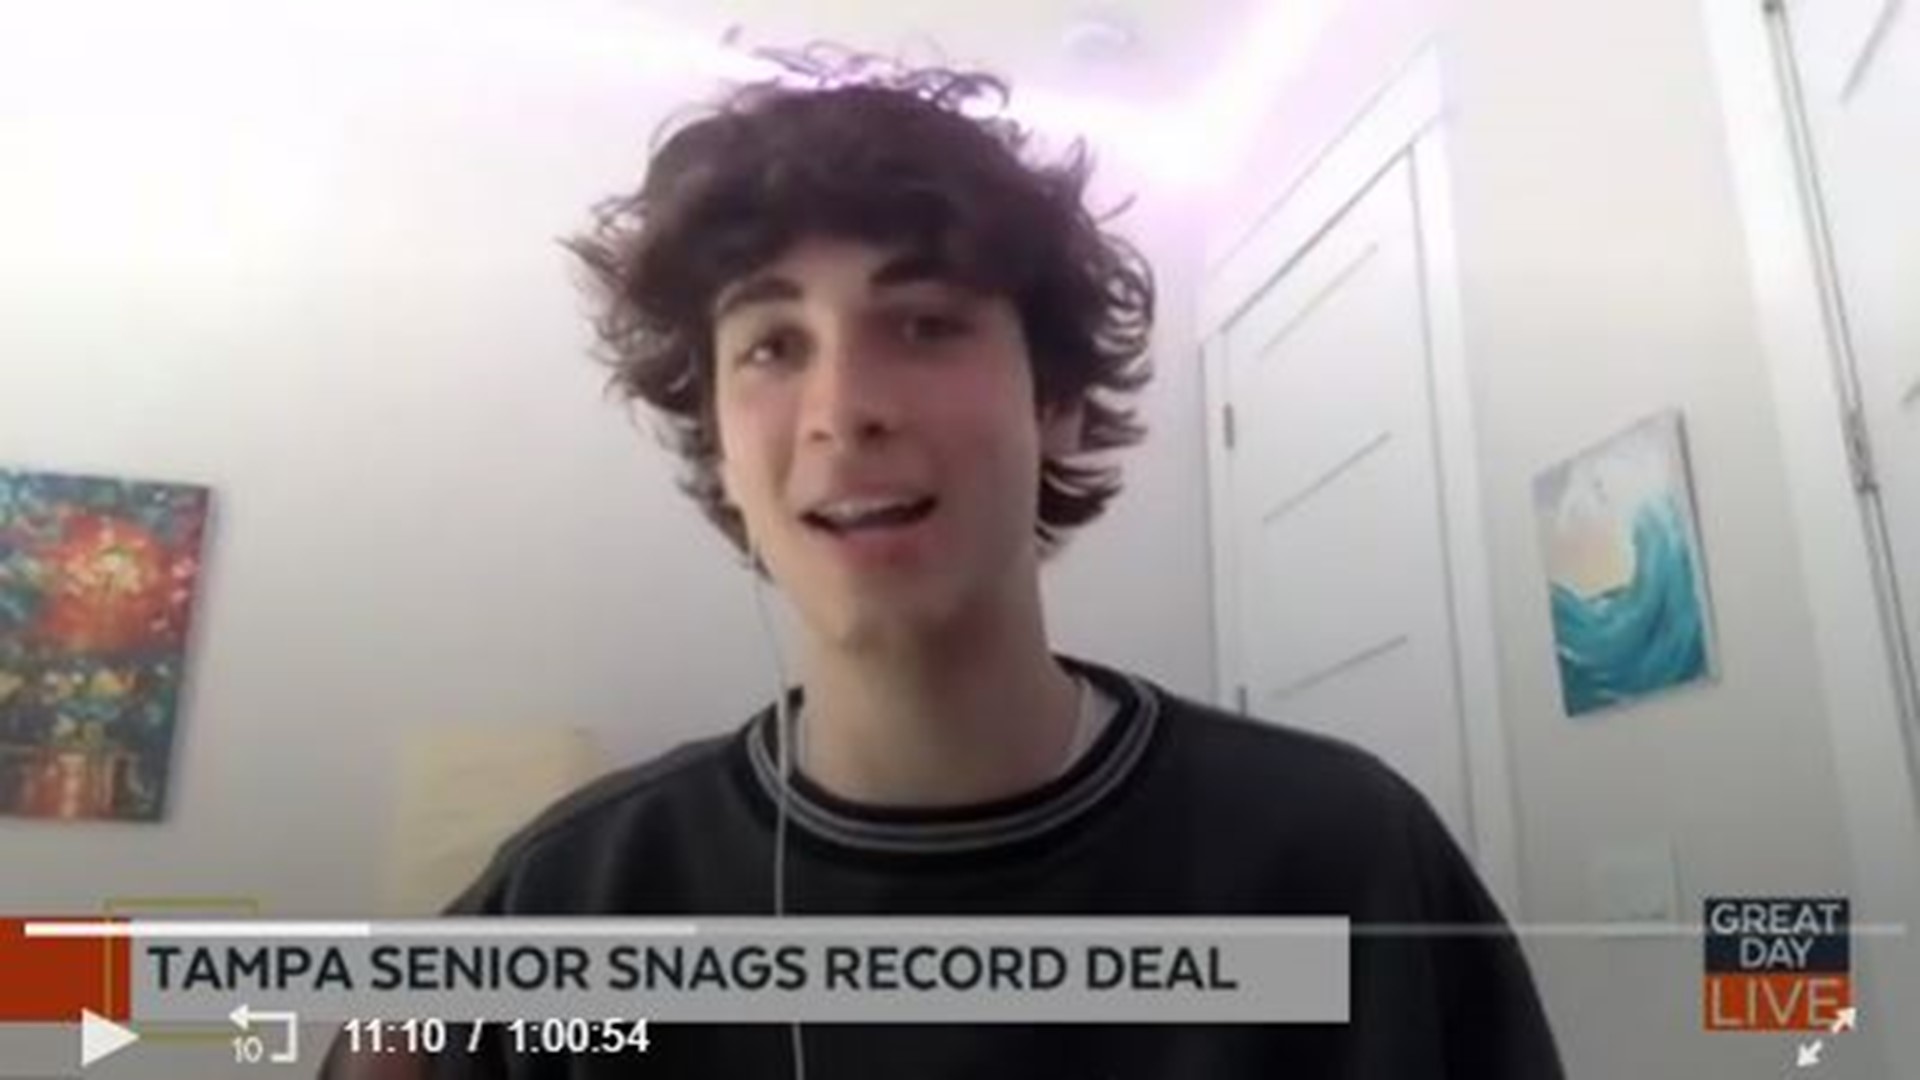 Jesuit High School senior Aidan Bissett scored a record deal after making his own music from home during quarantine.